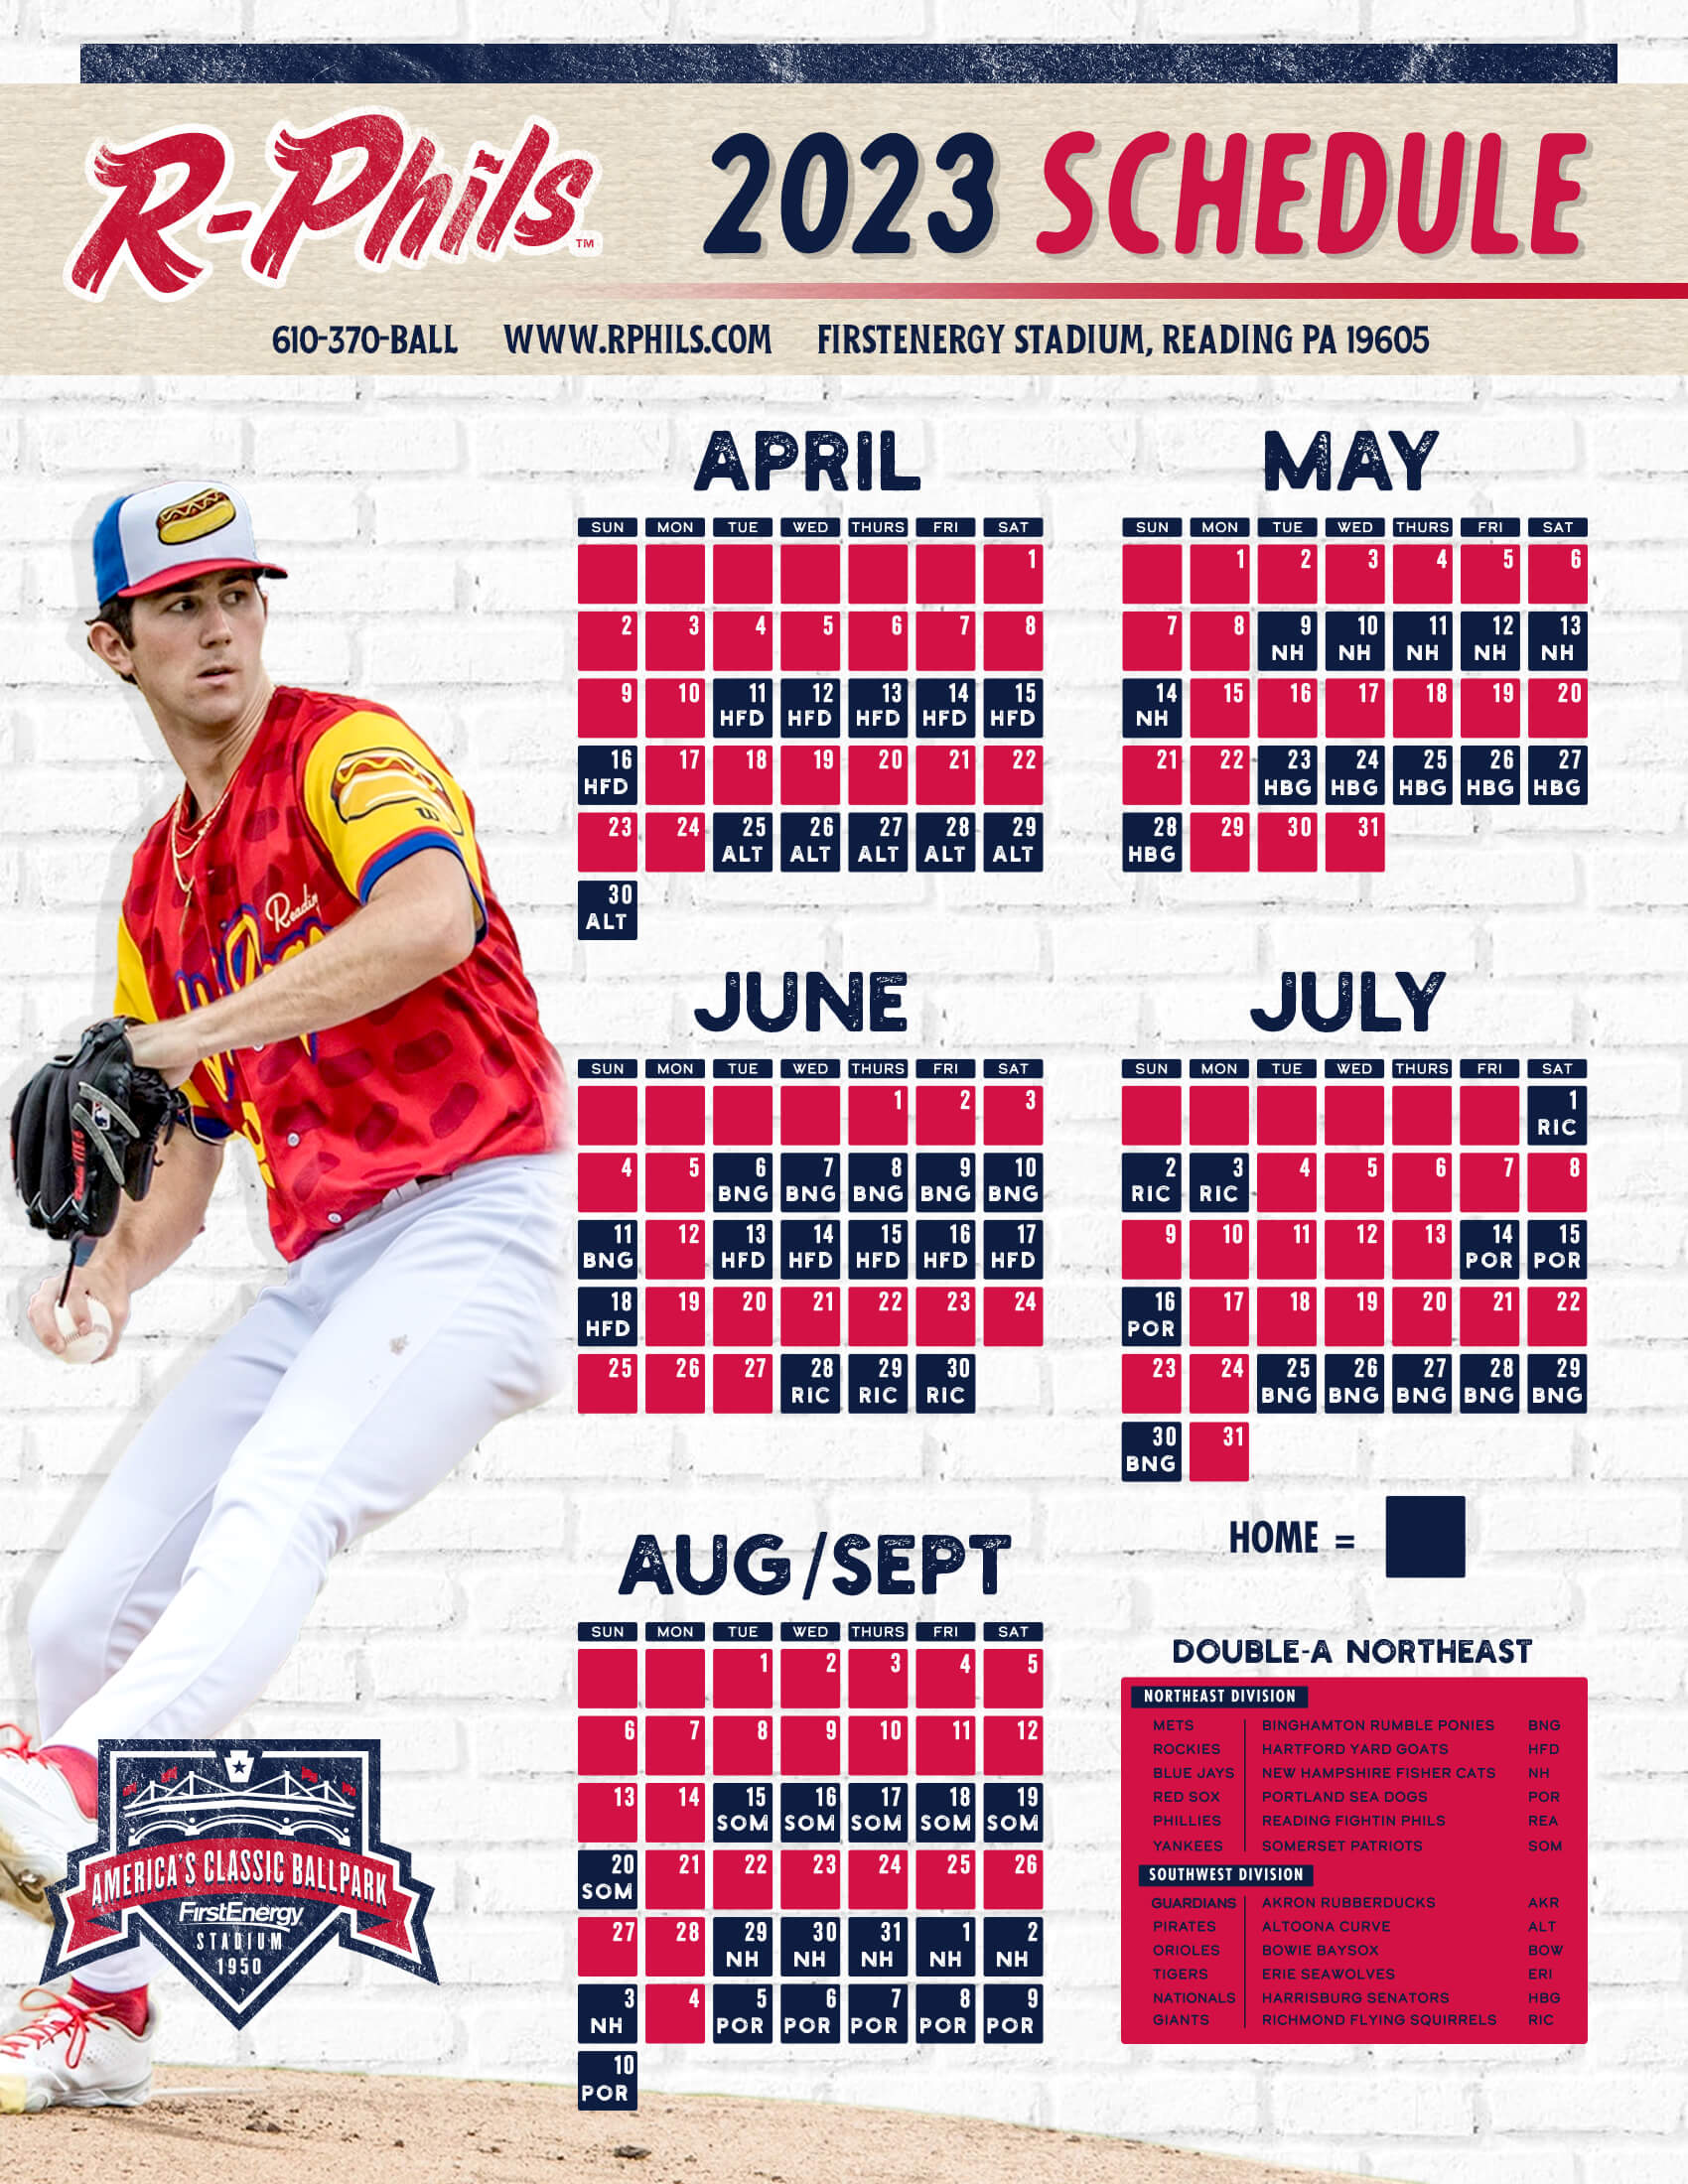 The 2023 Promotional Schedule is here!